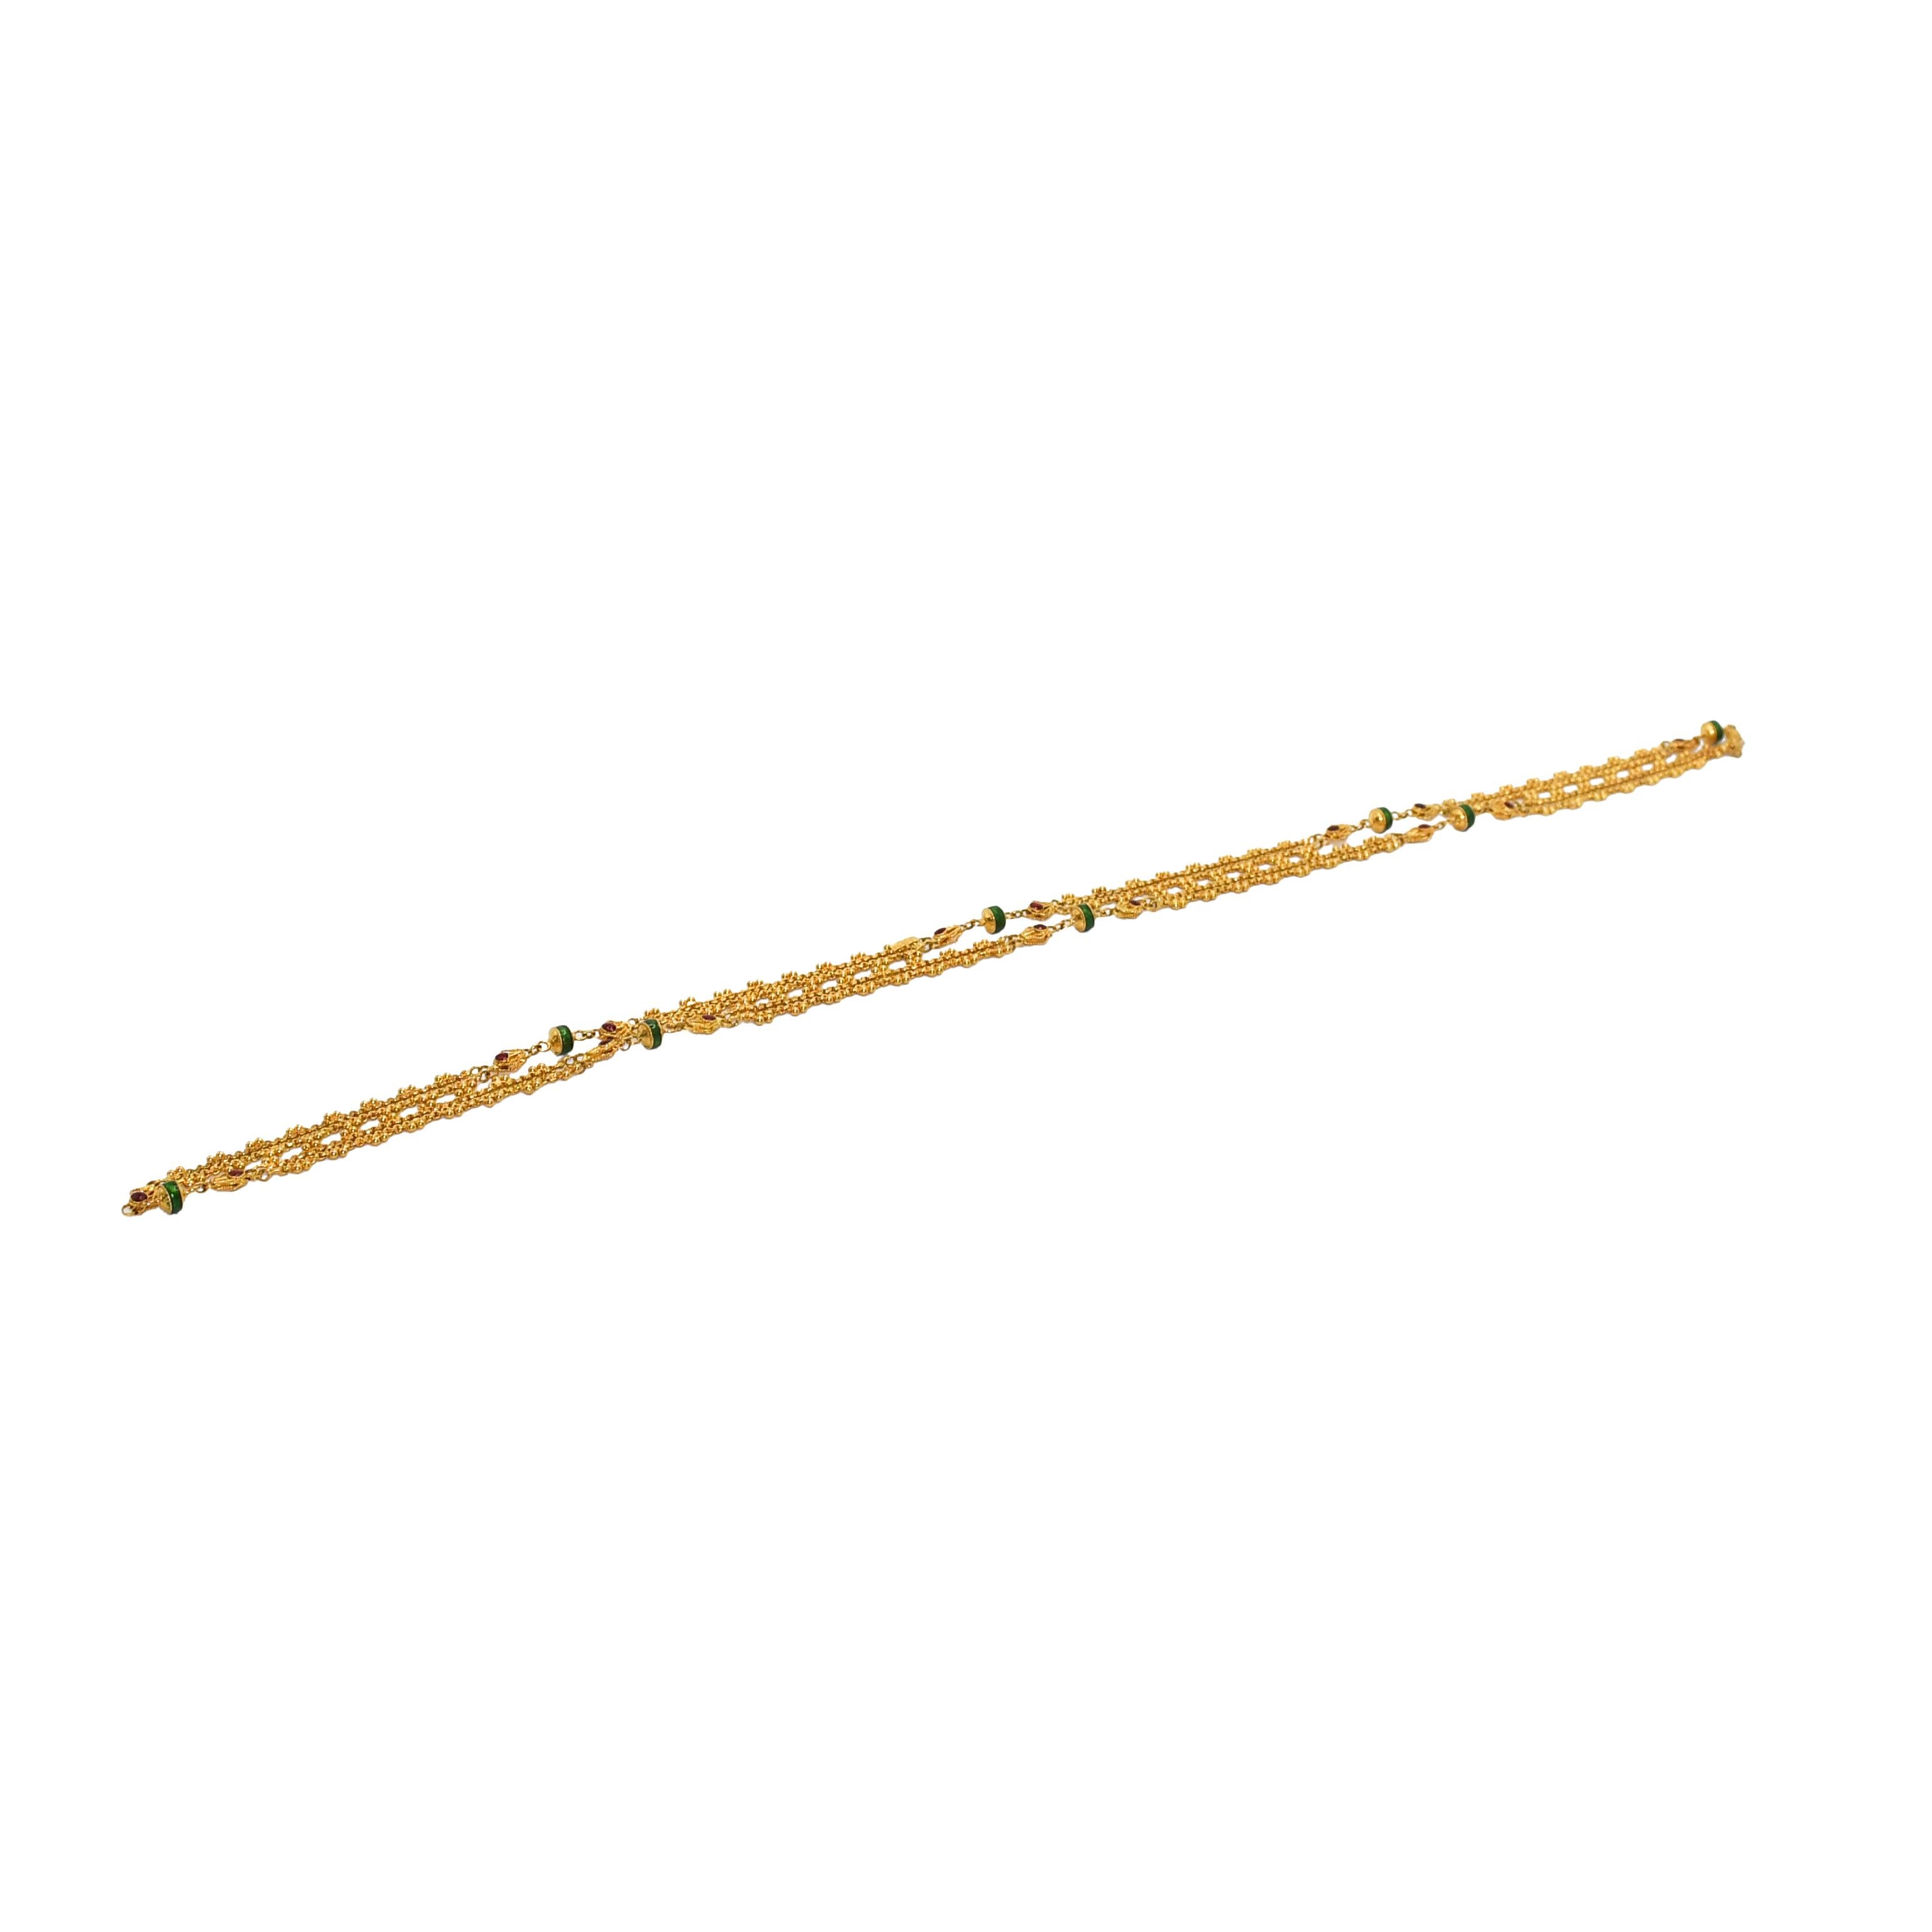 22k ornate Yellow Gold Enamel necklace.
Tests 22k, weighs 29.4gr
Length 28in, width 5.5mm